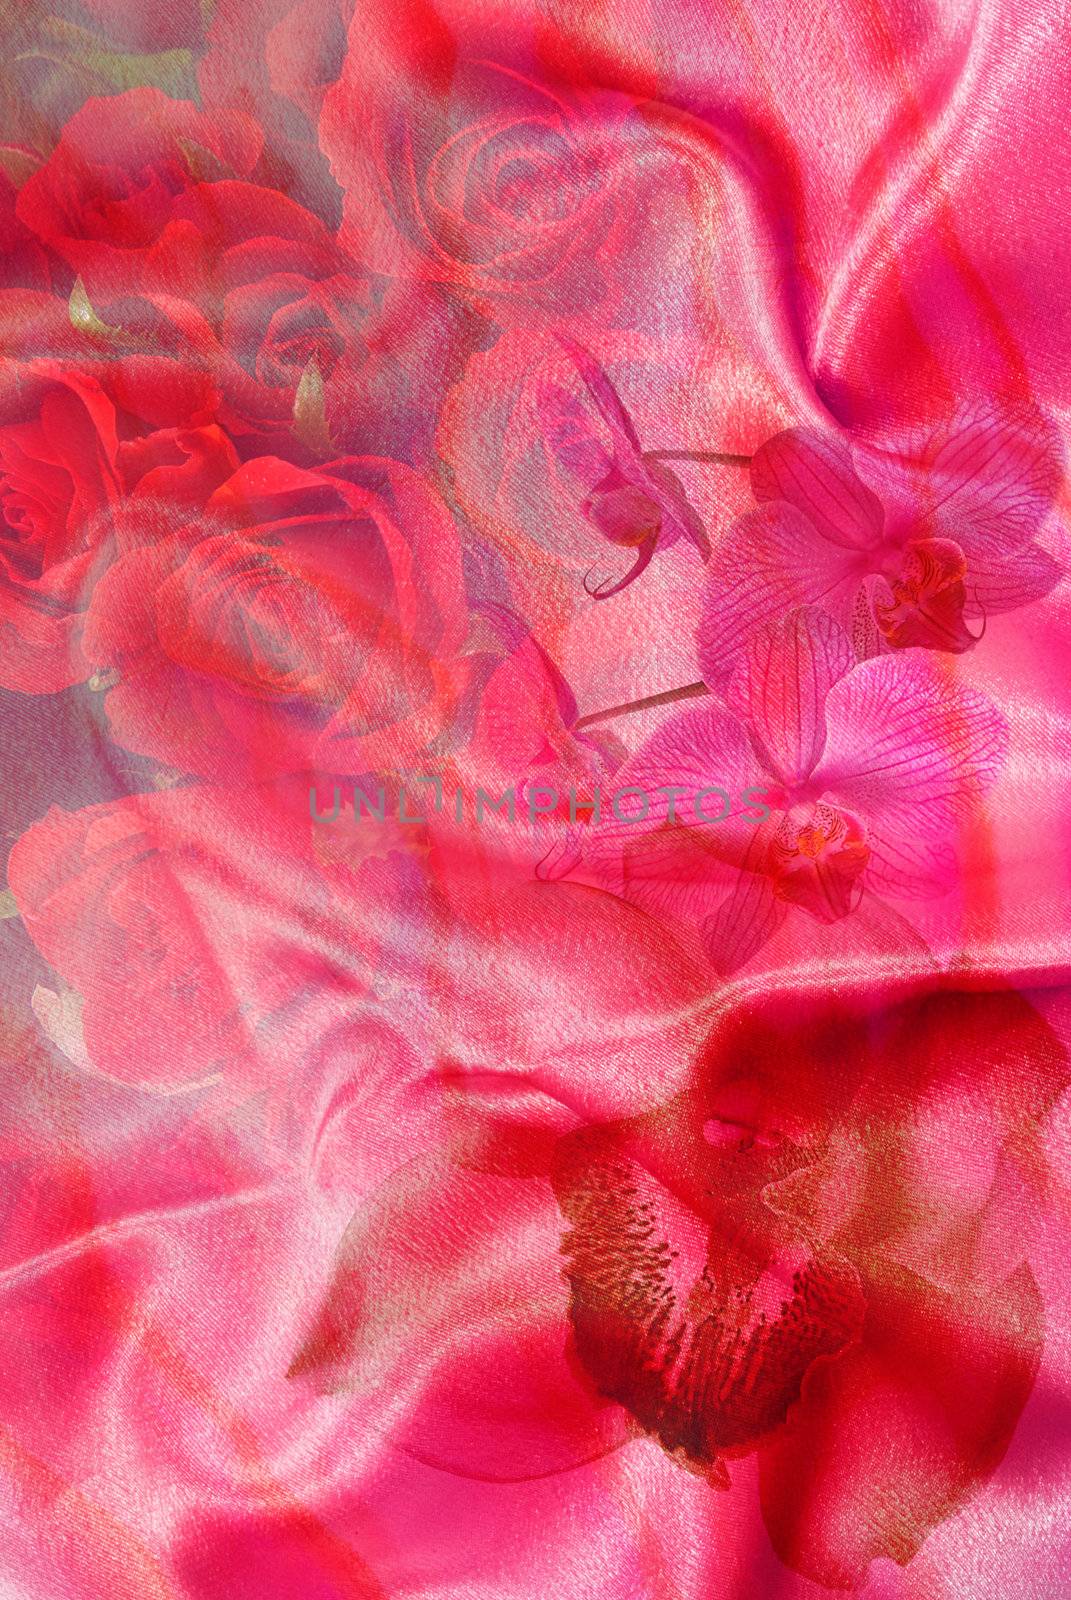 Romantic background with varioius flowers in pink satin